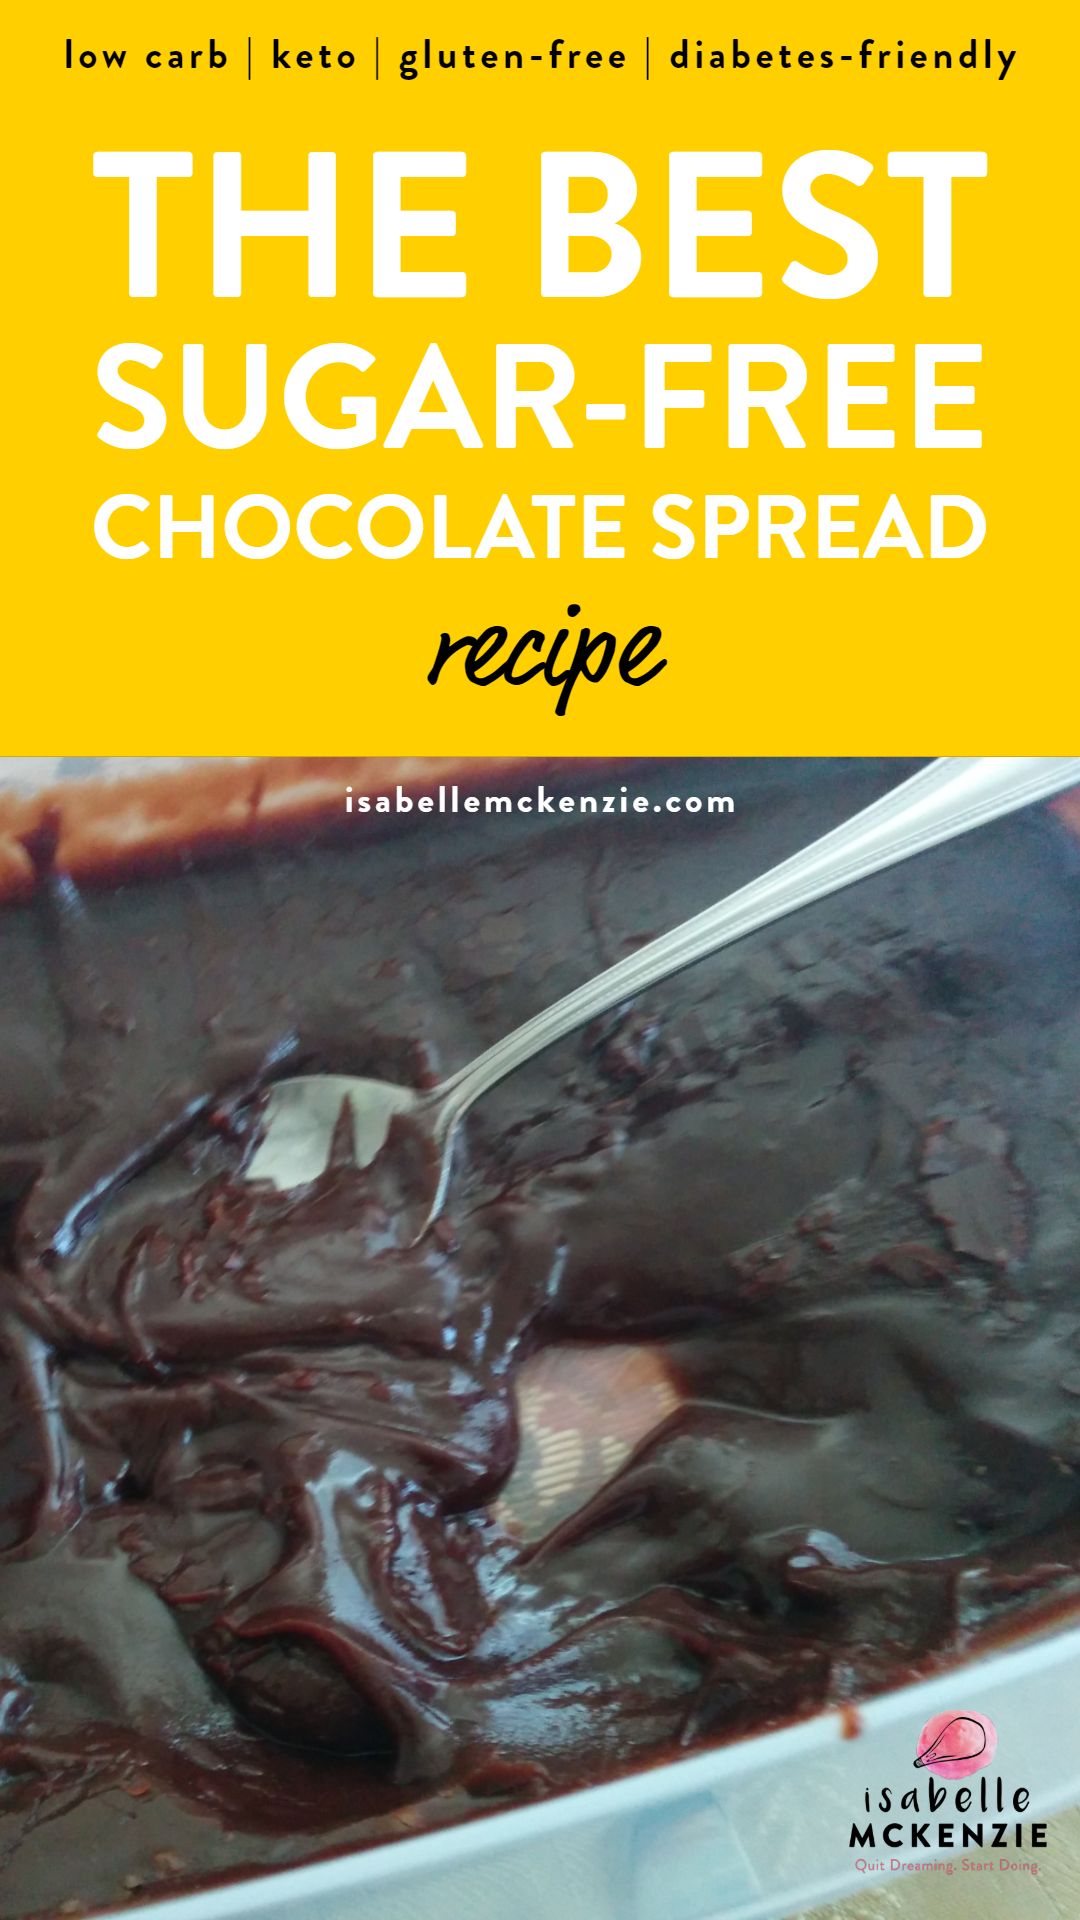 The Best Sugar-Free Chocolate Spread Recipe (Low Carb, Keto, Gluten-Free, and Diabetes Friendly)- Isabelle mckenzie